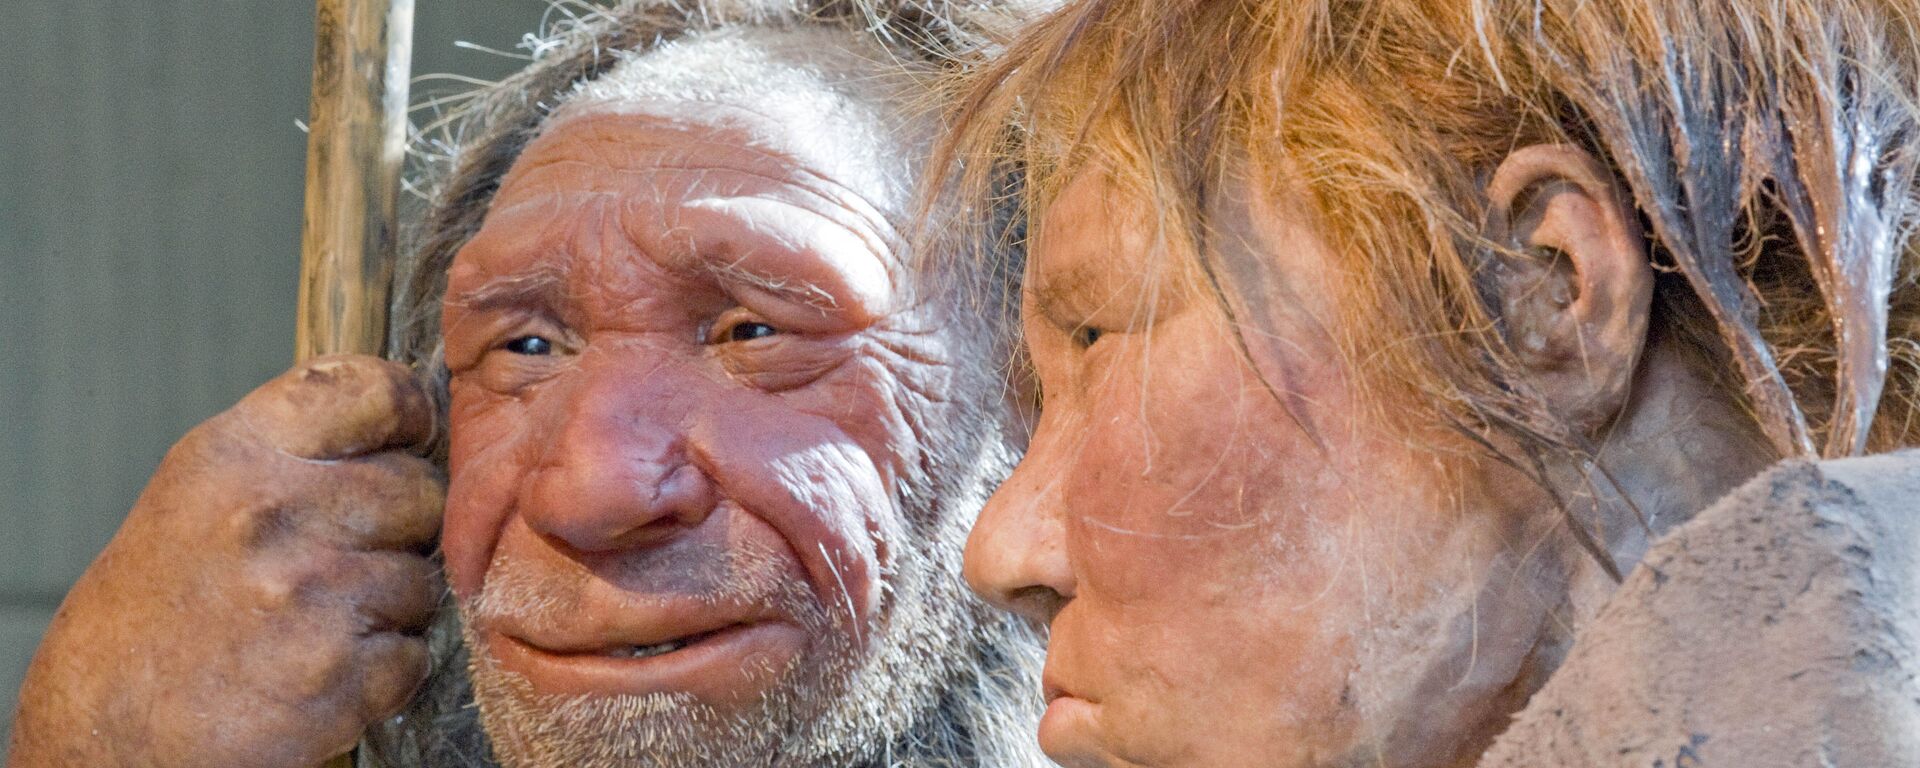 The prehistoric Neanderthal man N, left, is visited for the first time by another reconstruction of a homo neanderthalensis called Wilma, right, at the Neanderthal museum in Mettmann, Germany, Friday, March 20, 2009 - Sputnik International, 1920, 24.06.2021